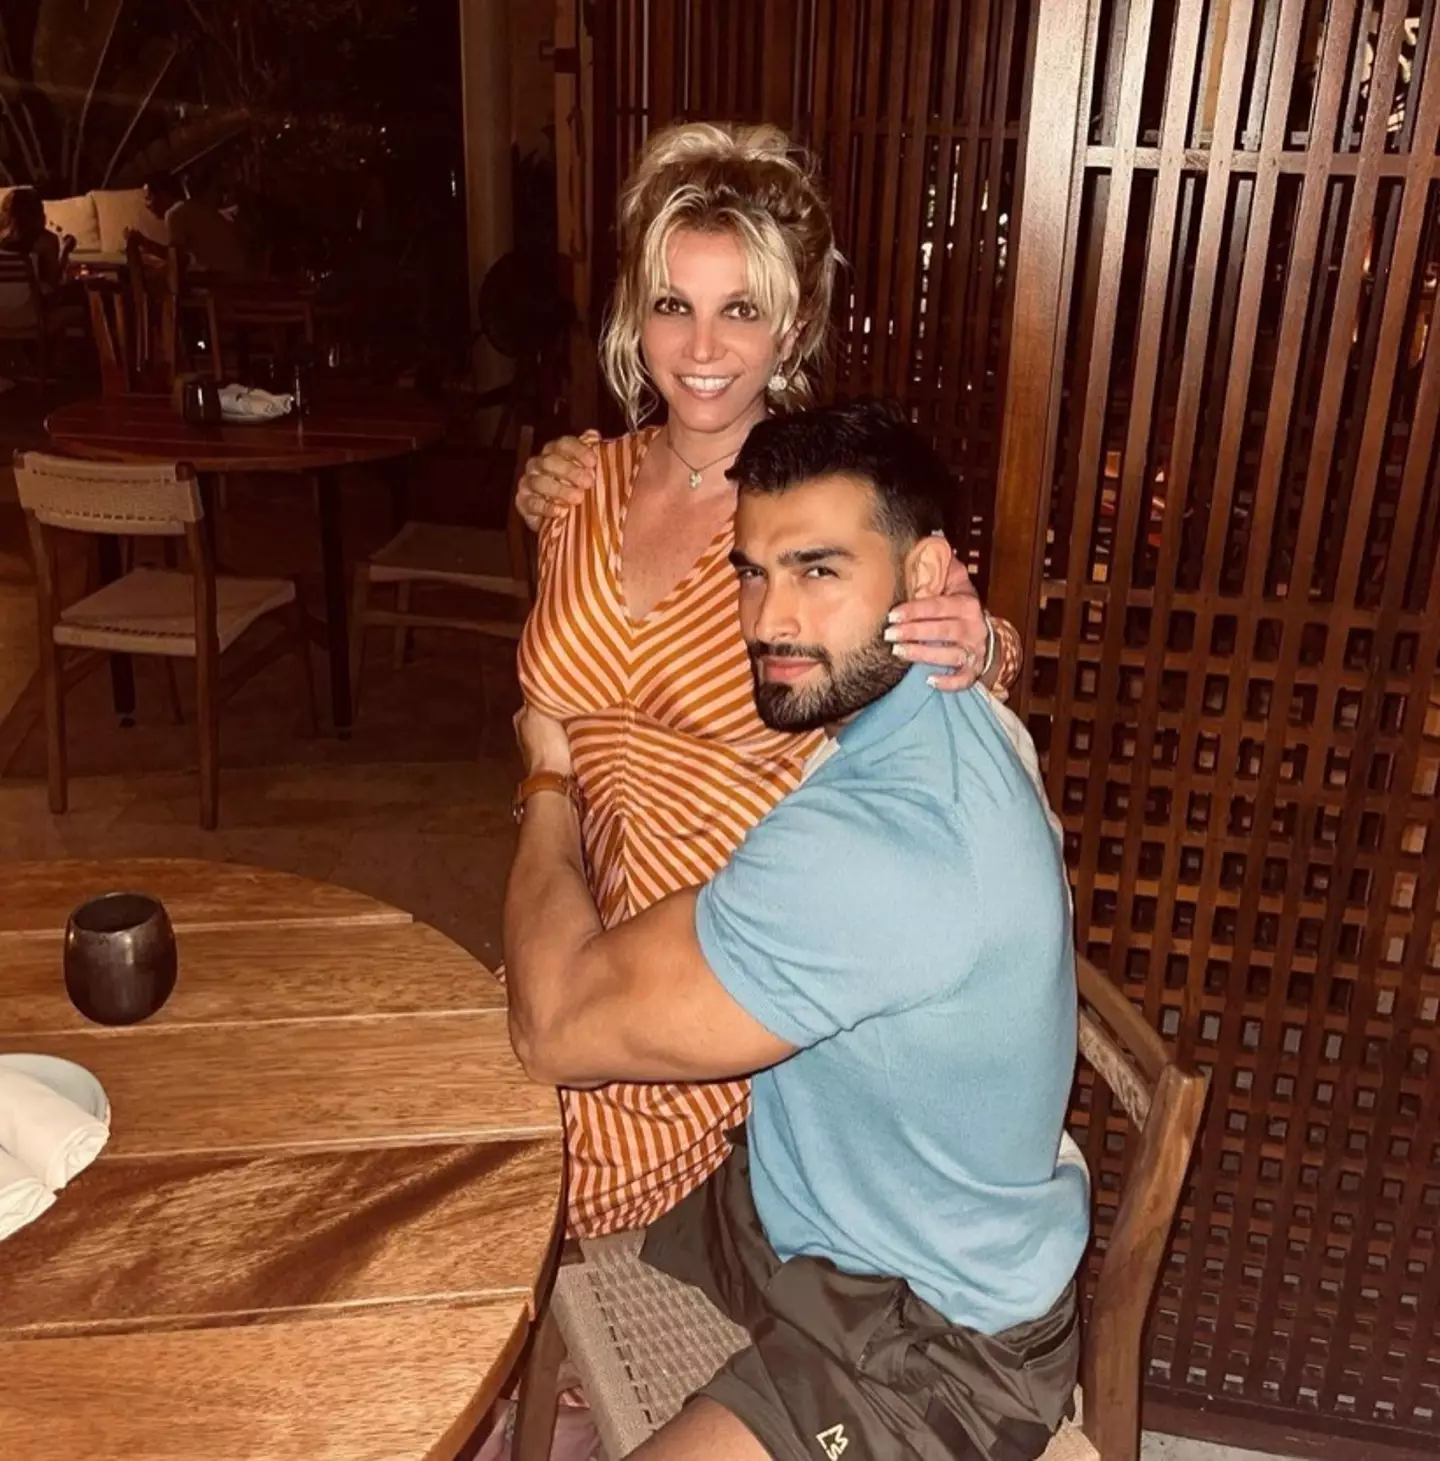 Britney Spears speaks out on her divorce from Sam Asghari and says she 'couldn't take pain anymore' after 14 months of marriage.